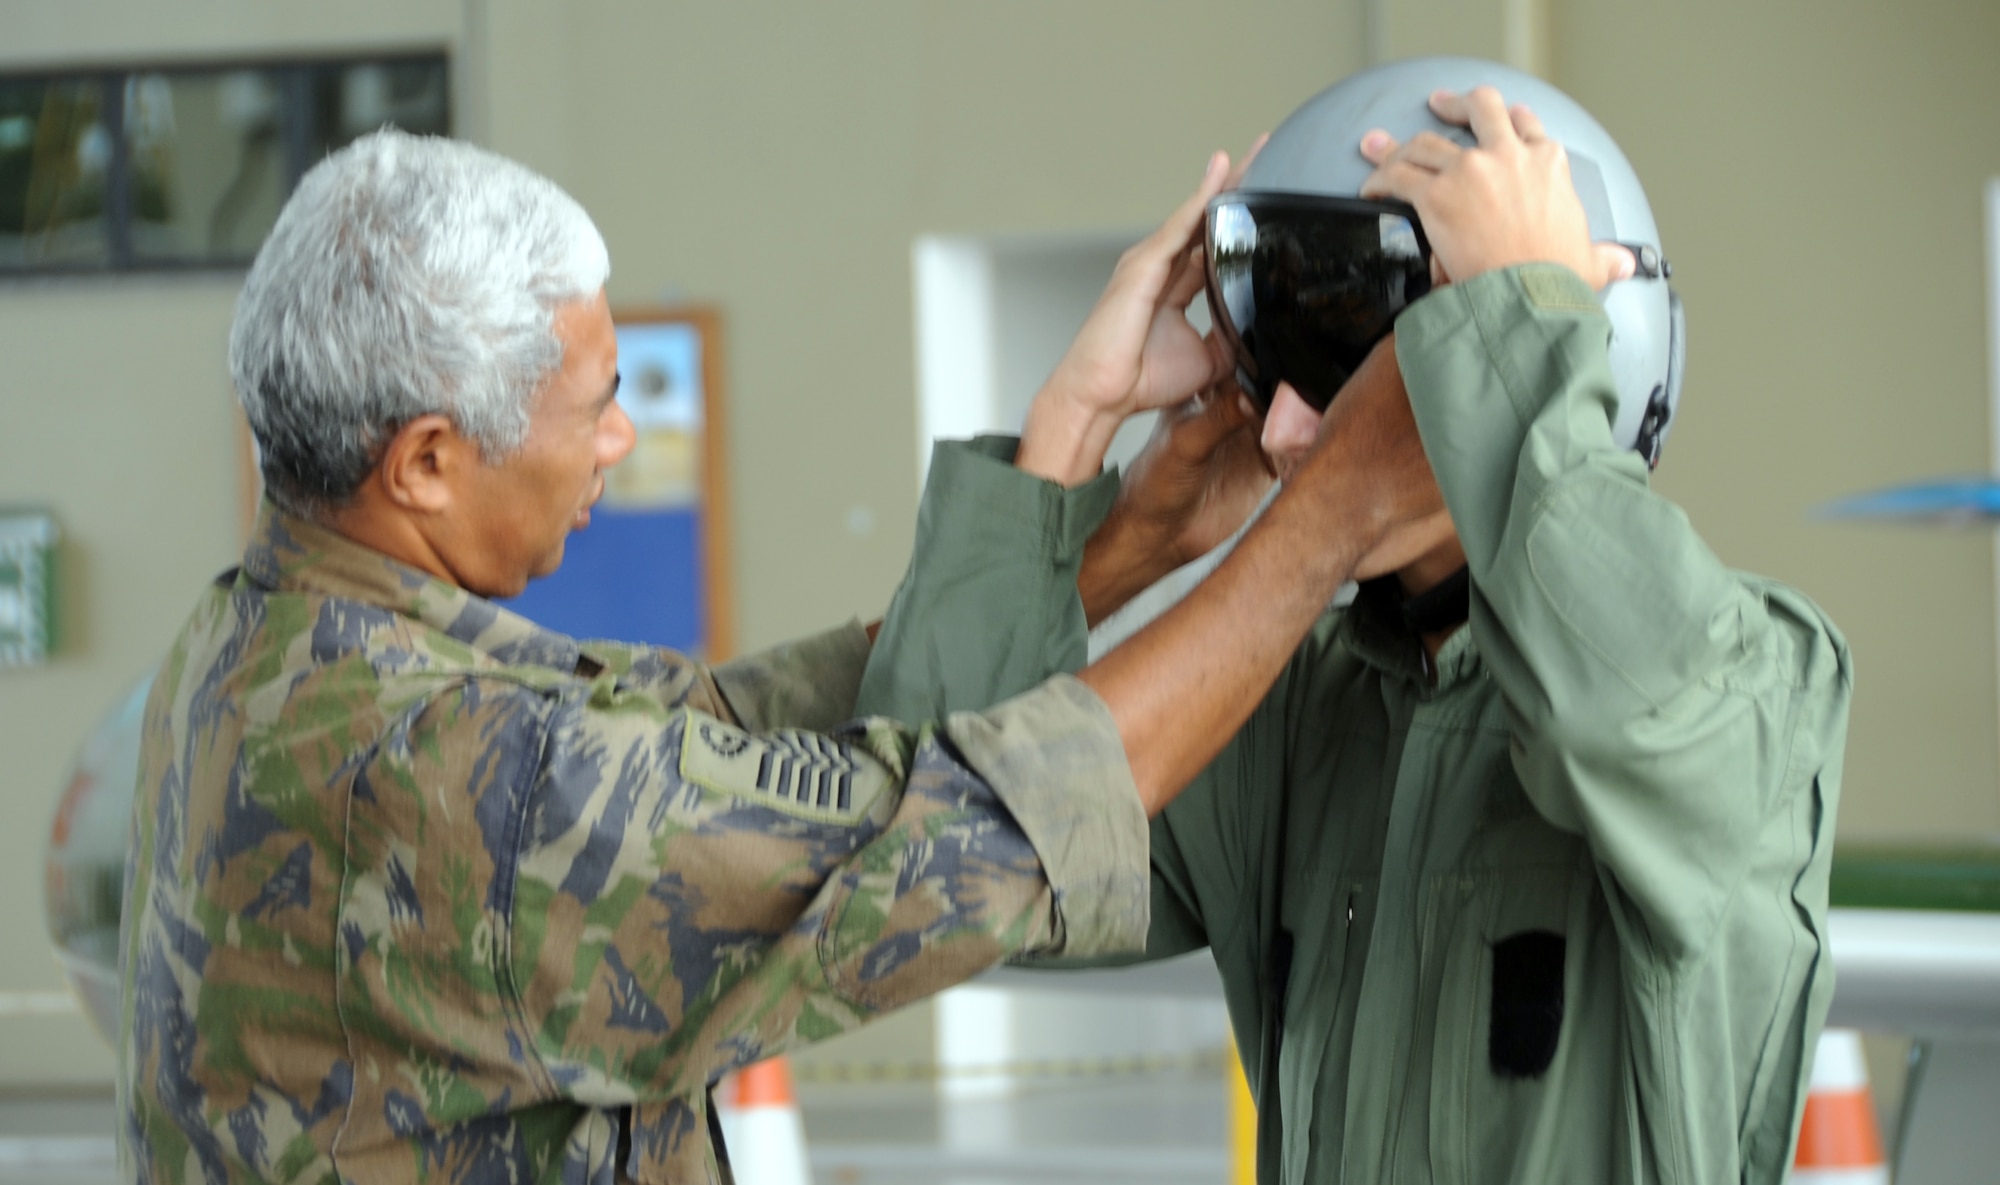 A local youth is fitted in a helmet during an open house at Natal Air Base, Brazil in conjunction with CRUZEX V. CRUZEX, or Cruzeiro Do Sul (Southern Cross), is a multi-national combined exercise involving the Air Forces of Argentina, Brazil, Chile, France and Uruguay, and observers from numerous other countries with more than 82 aircraft and almost 3,000 Airmen involved. (U.S. Air Force photo/Staff Sgt. Michael Matkin)